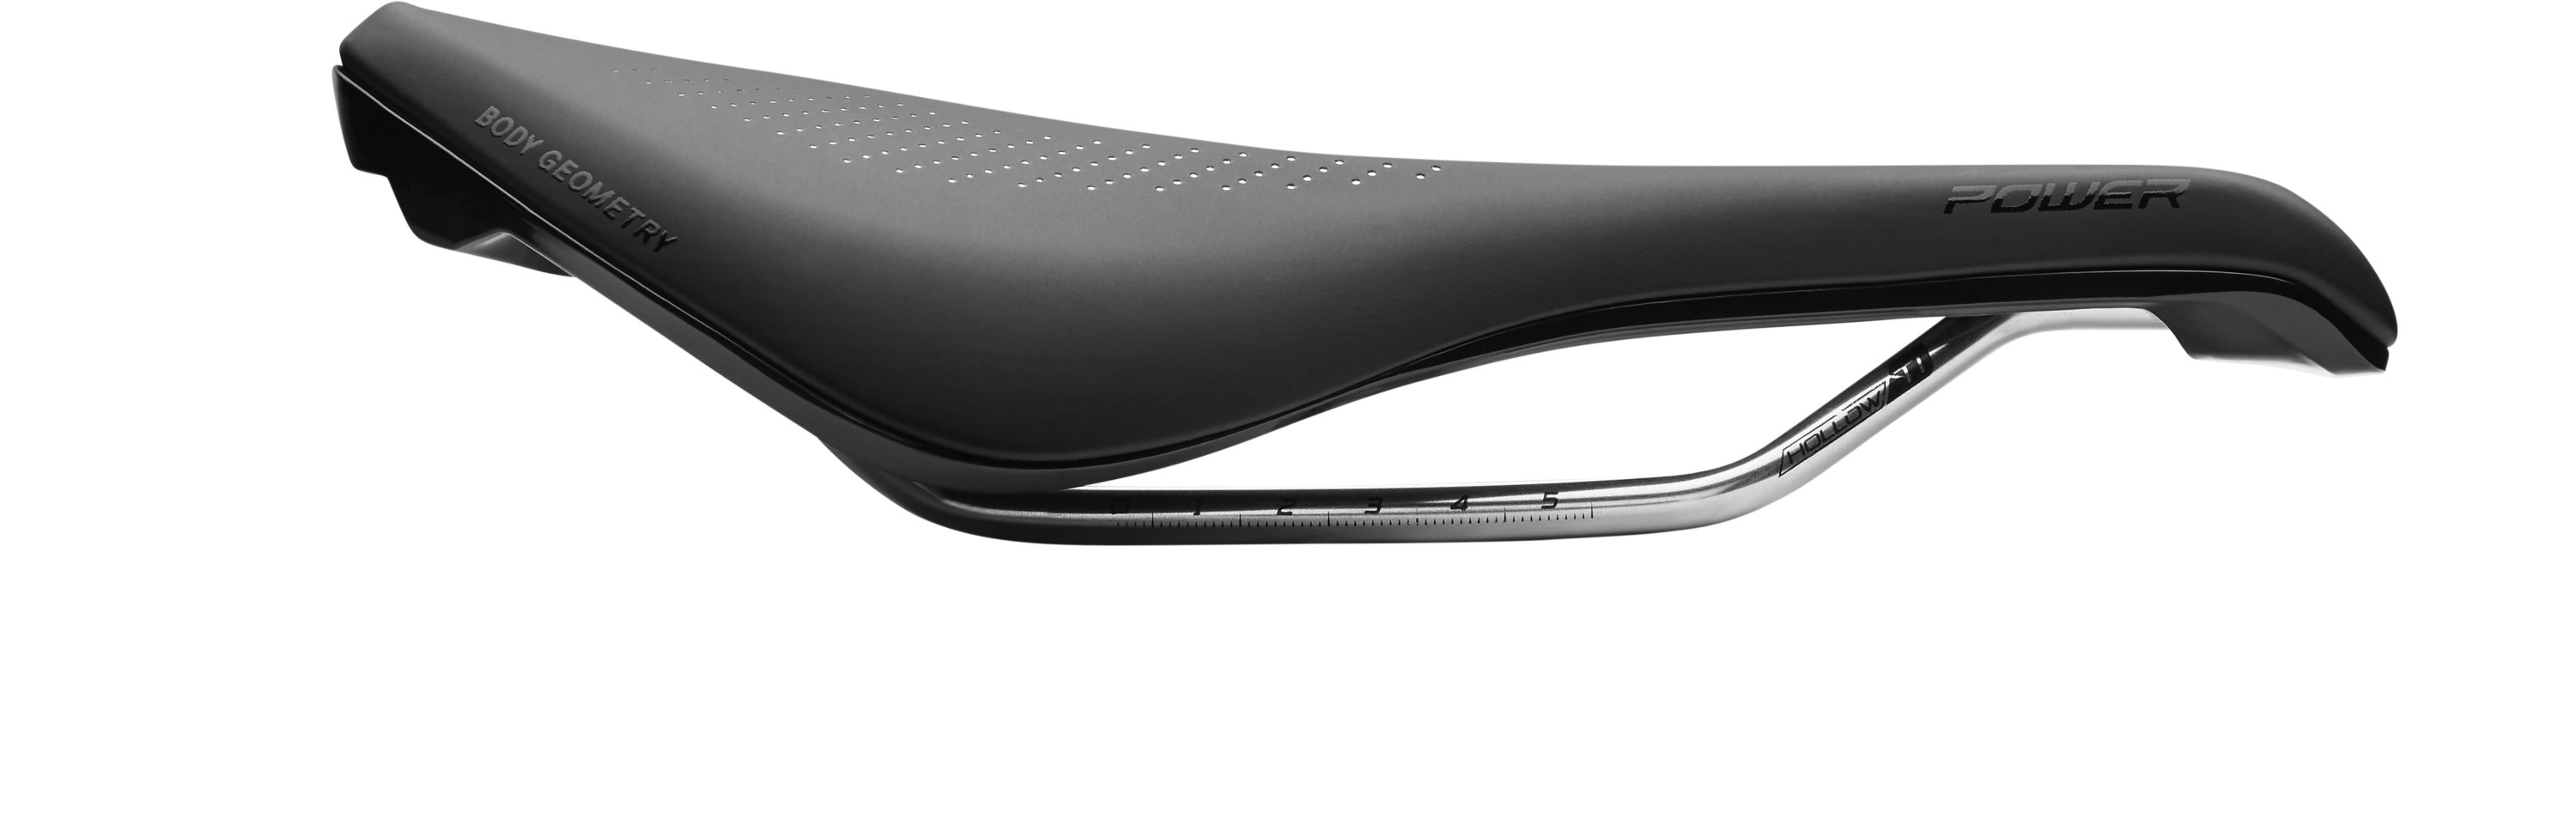 specialized power expert saddle stores